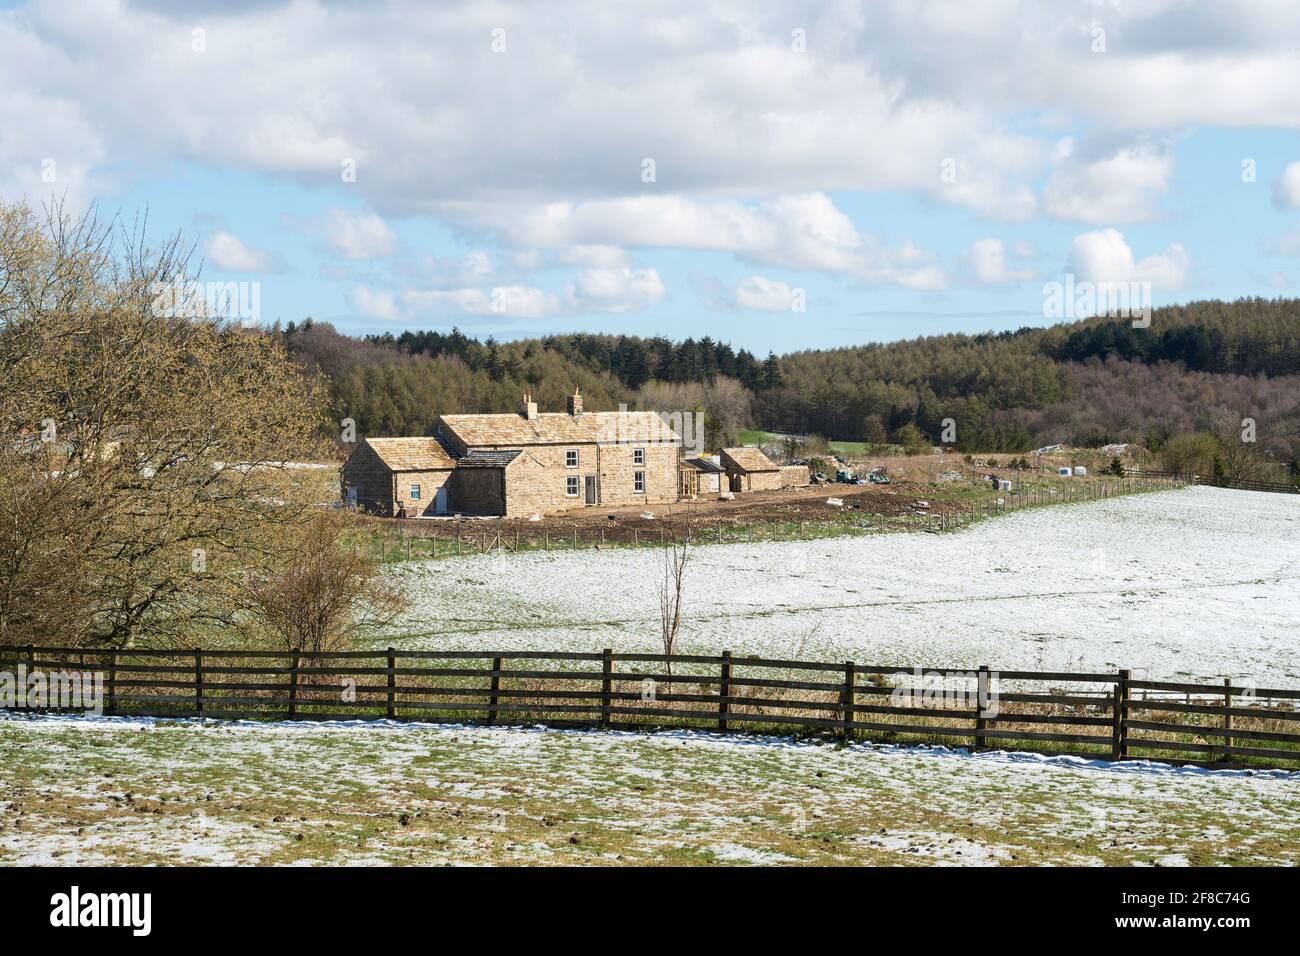 Spain’s Field Farm, an 18th century farmhouse from Weardale rebuilt at Beamish Museum, Co. Durham, England, UK Stock Photo